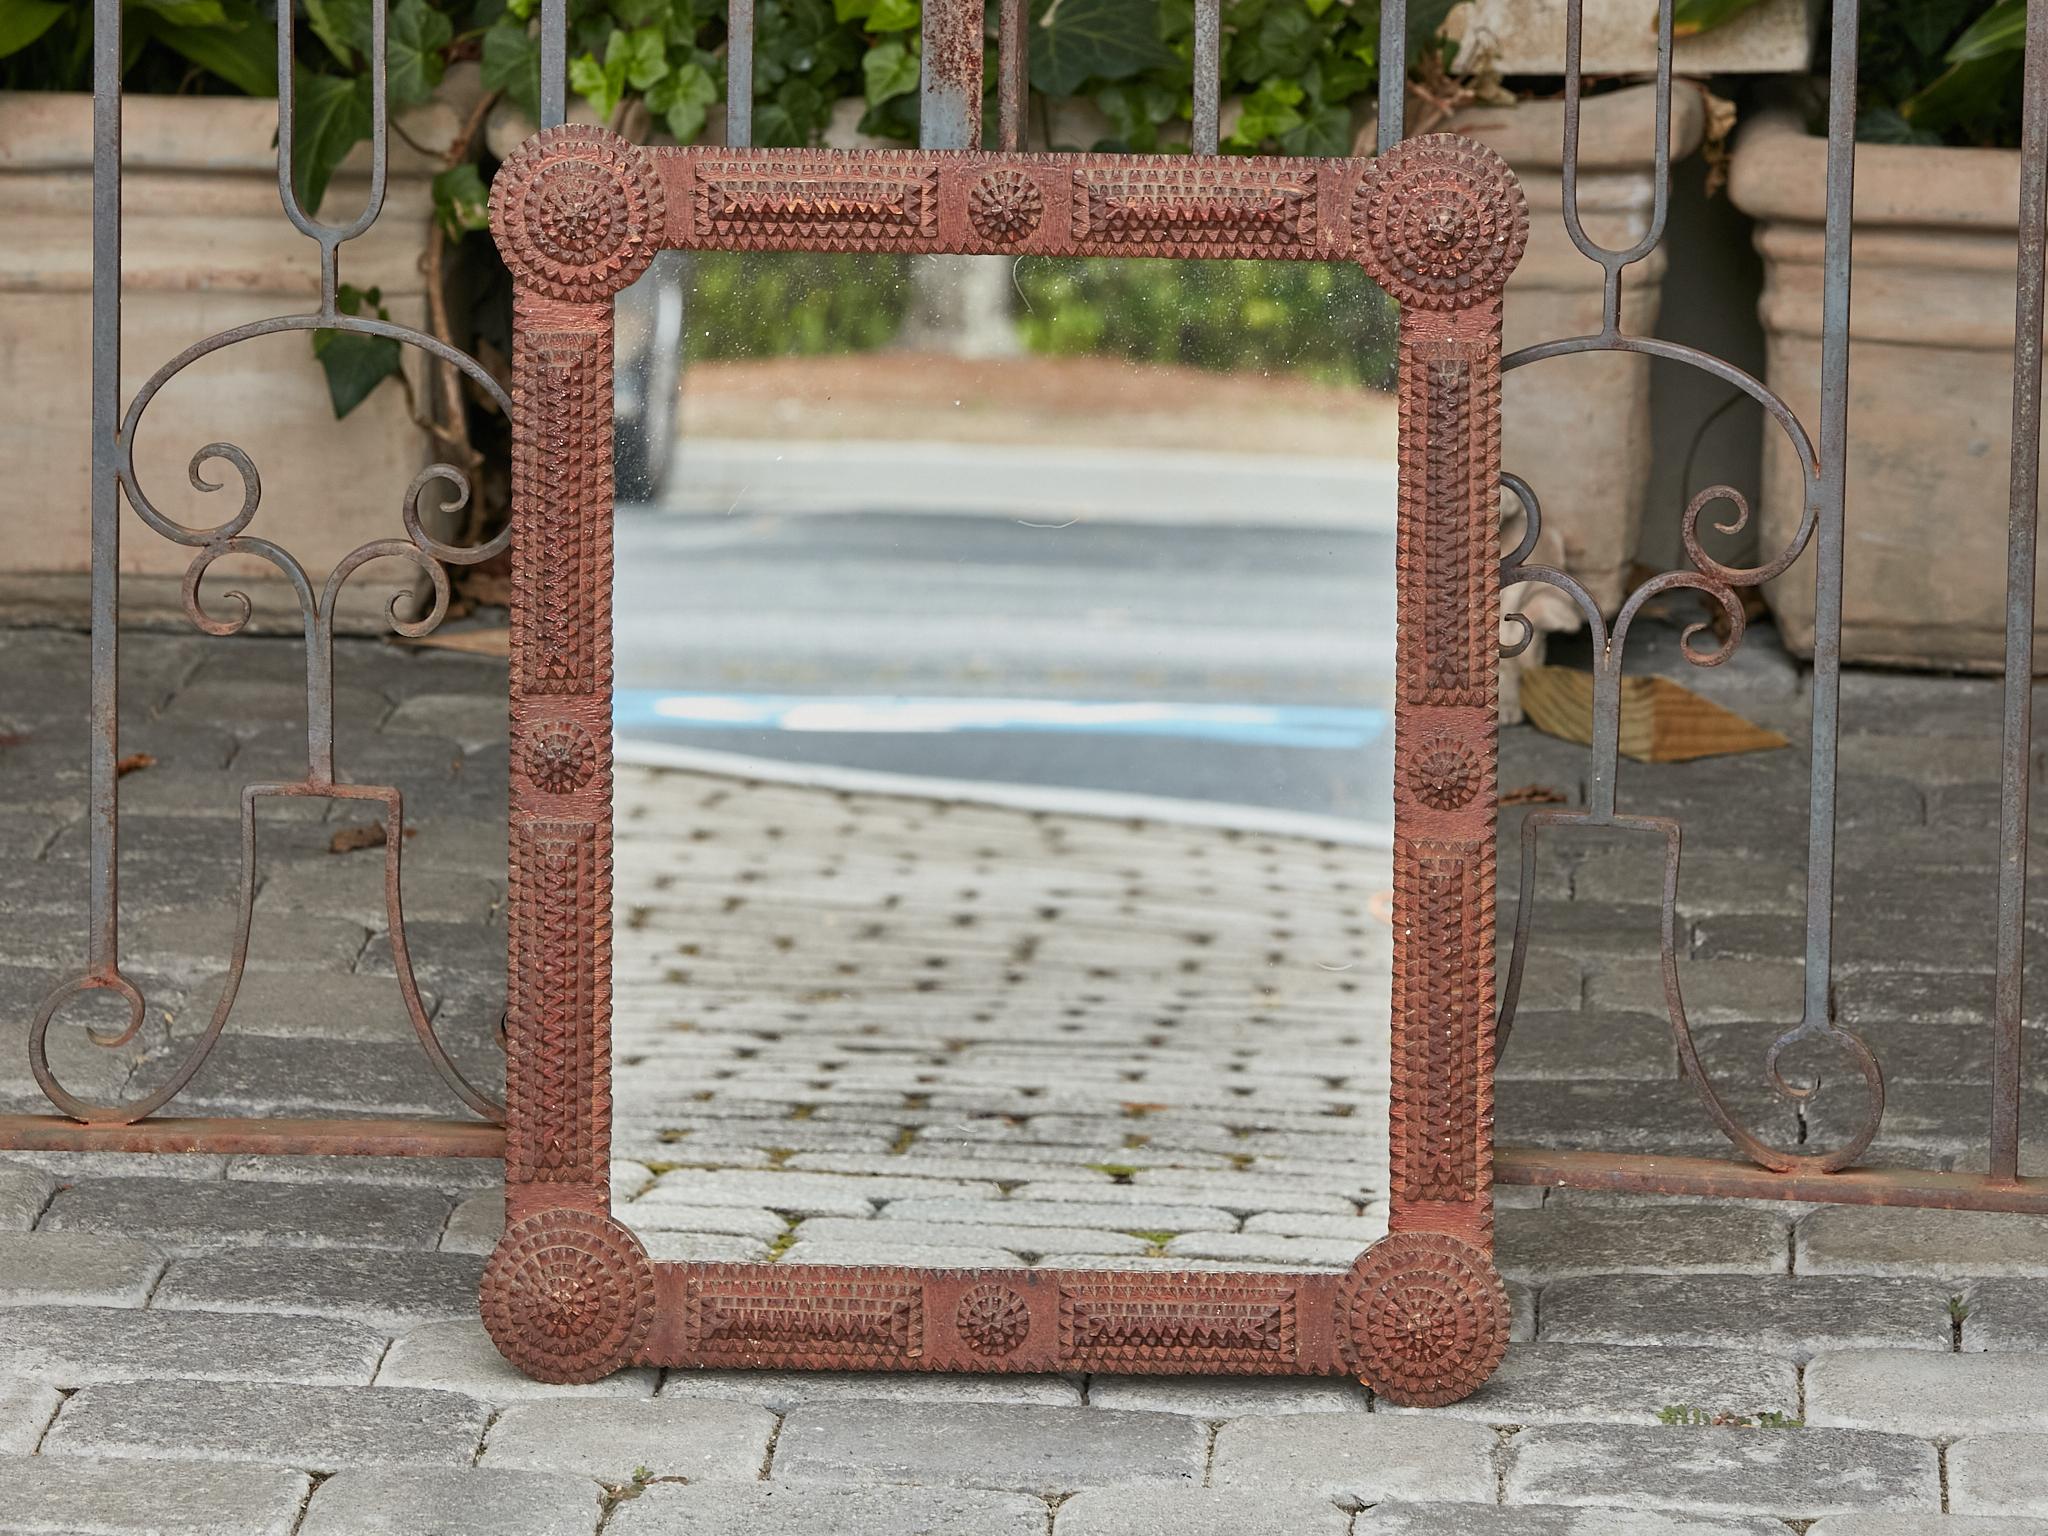 A French Tramp Art hand-carved wooden mirror from circa 1900 with circular protruding raised medallions in the corners. This French Tramp Art hand-carved wooden mirror, dating back to circa 1900, is a remarkable example of folk artistry and detailed